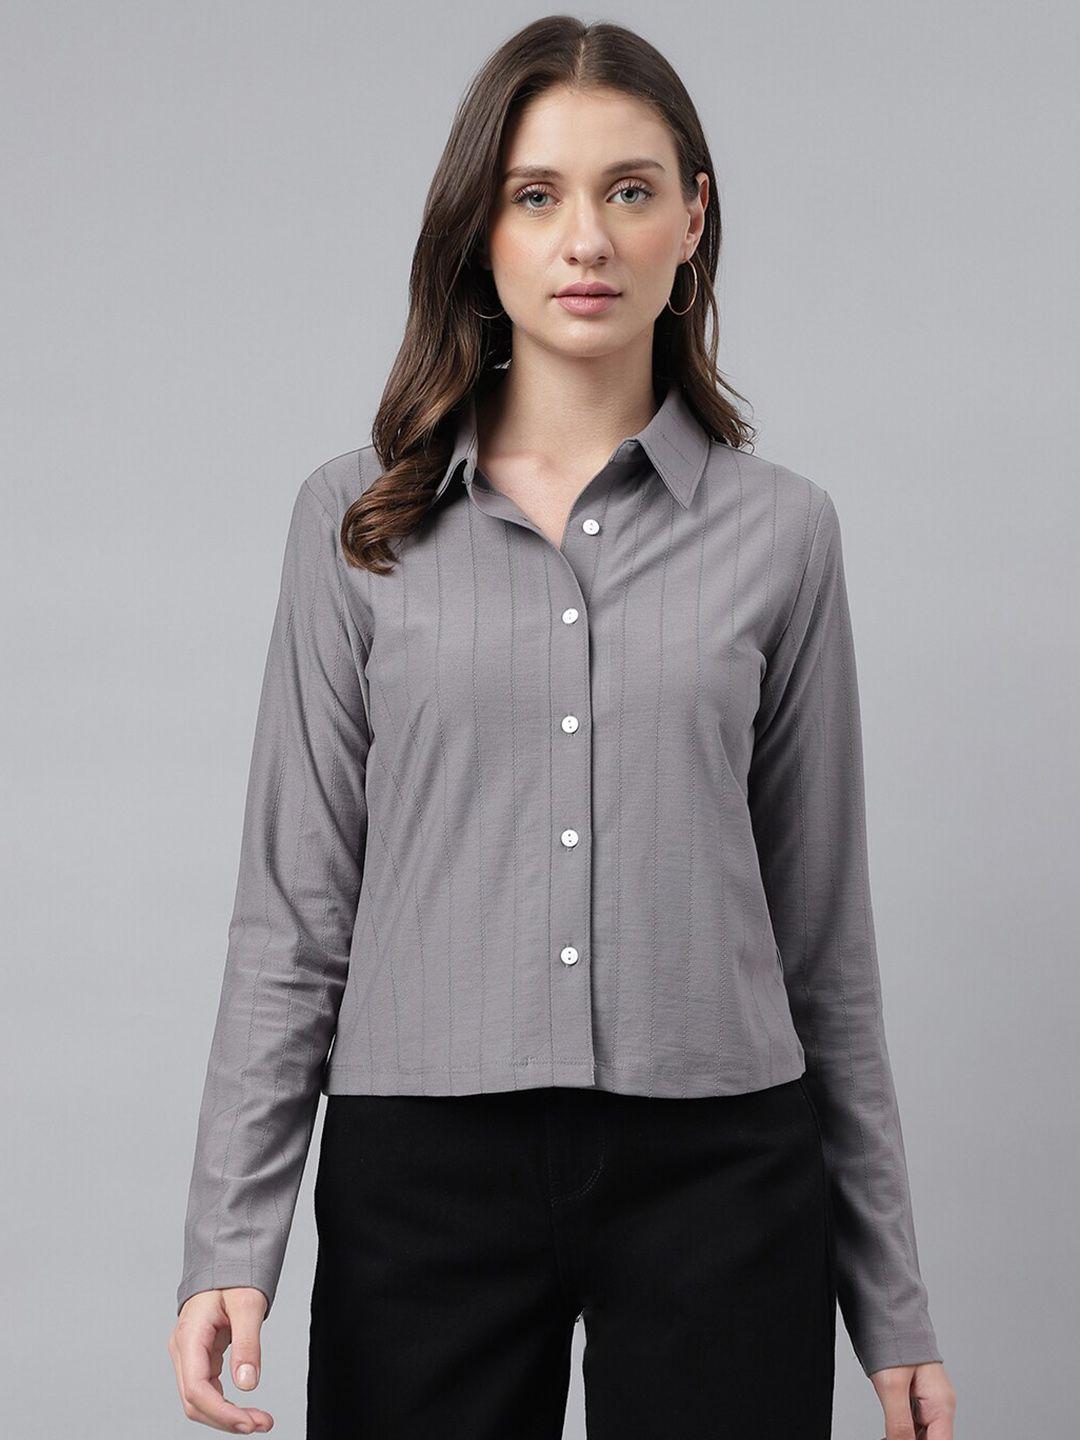 xpose vertical striped spread collar comfort casual shirt